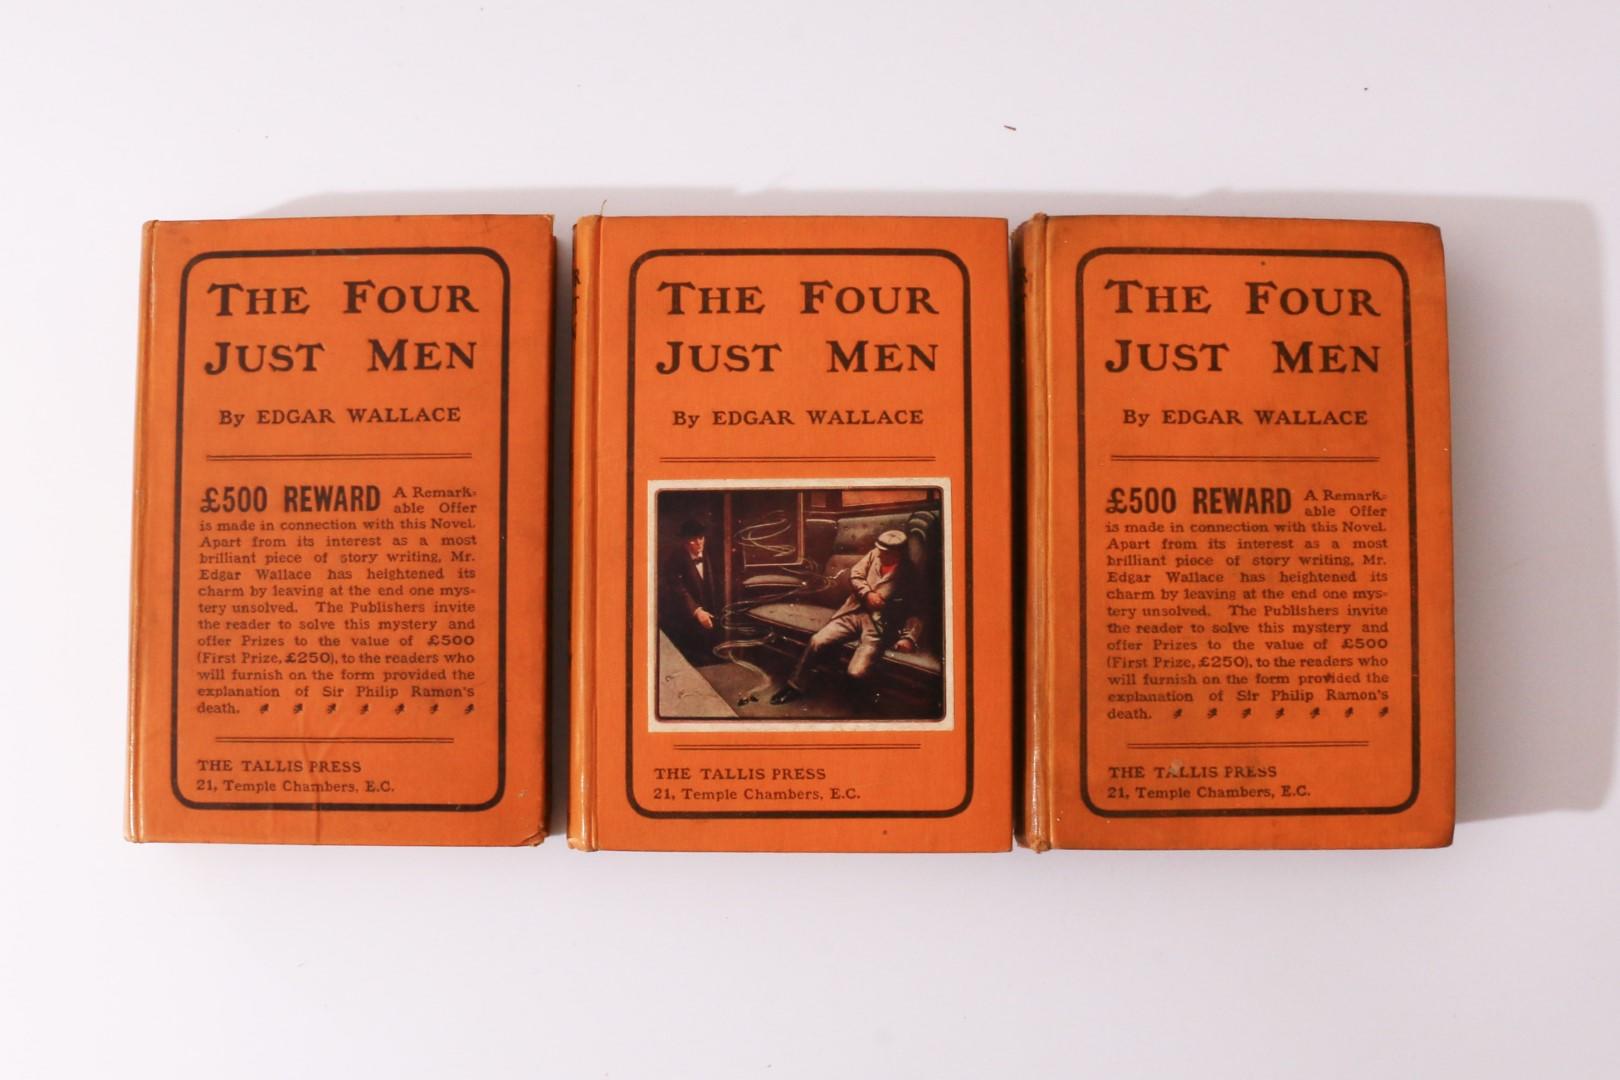 Edgar Wallace - The Four Just Men - The Tallis Press, 1905, Signed First Edition.